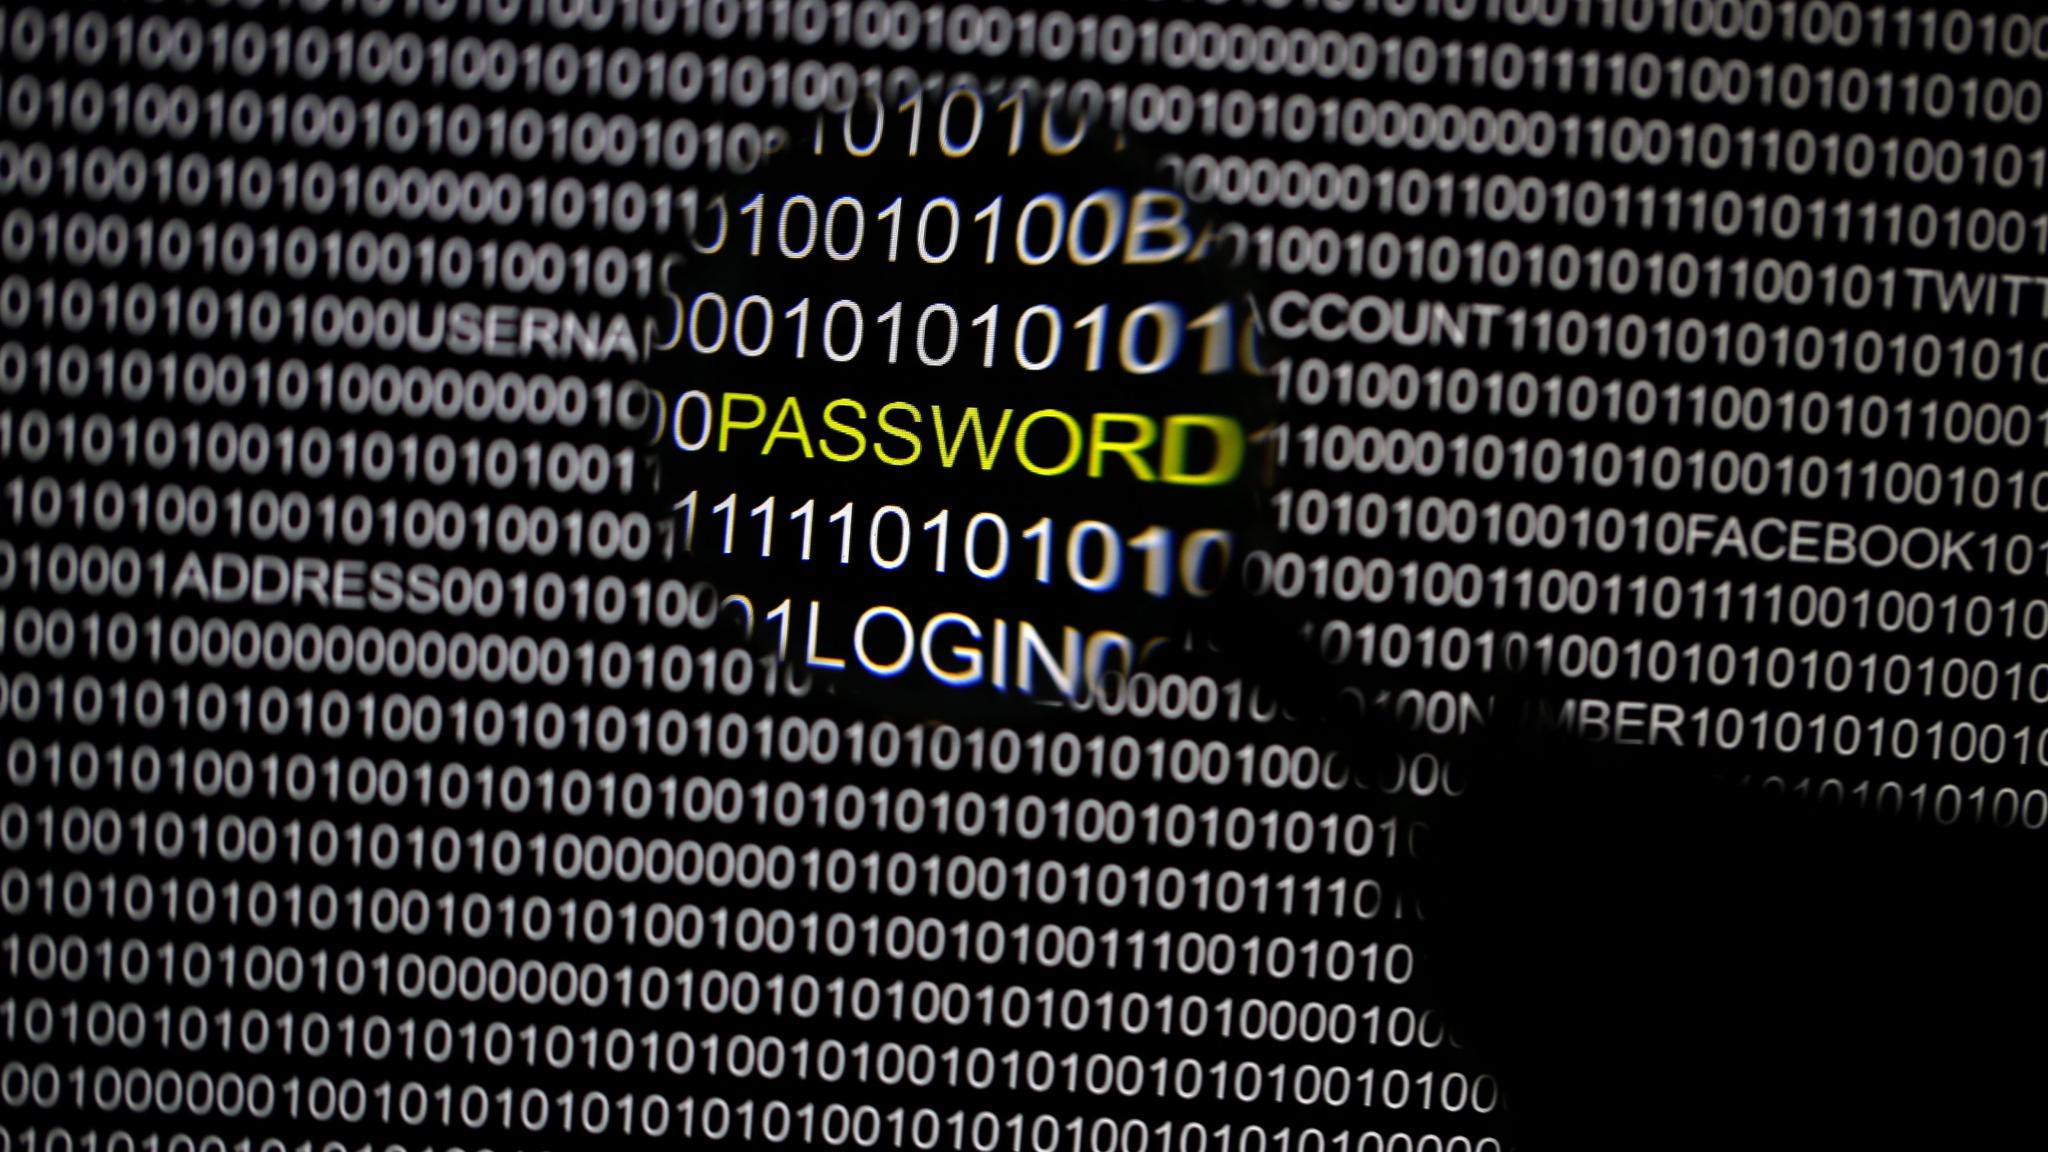 Russian government behind cyber attacks, says security group